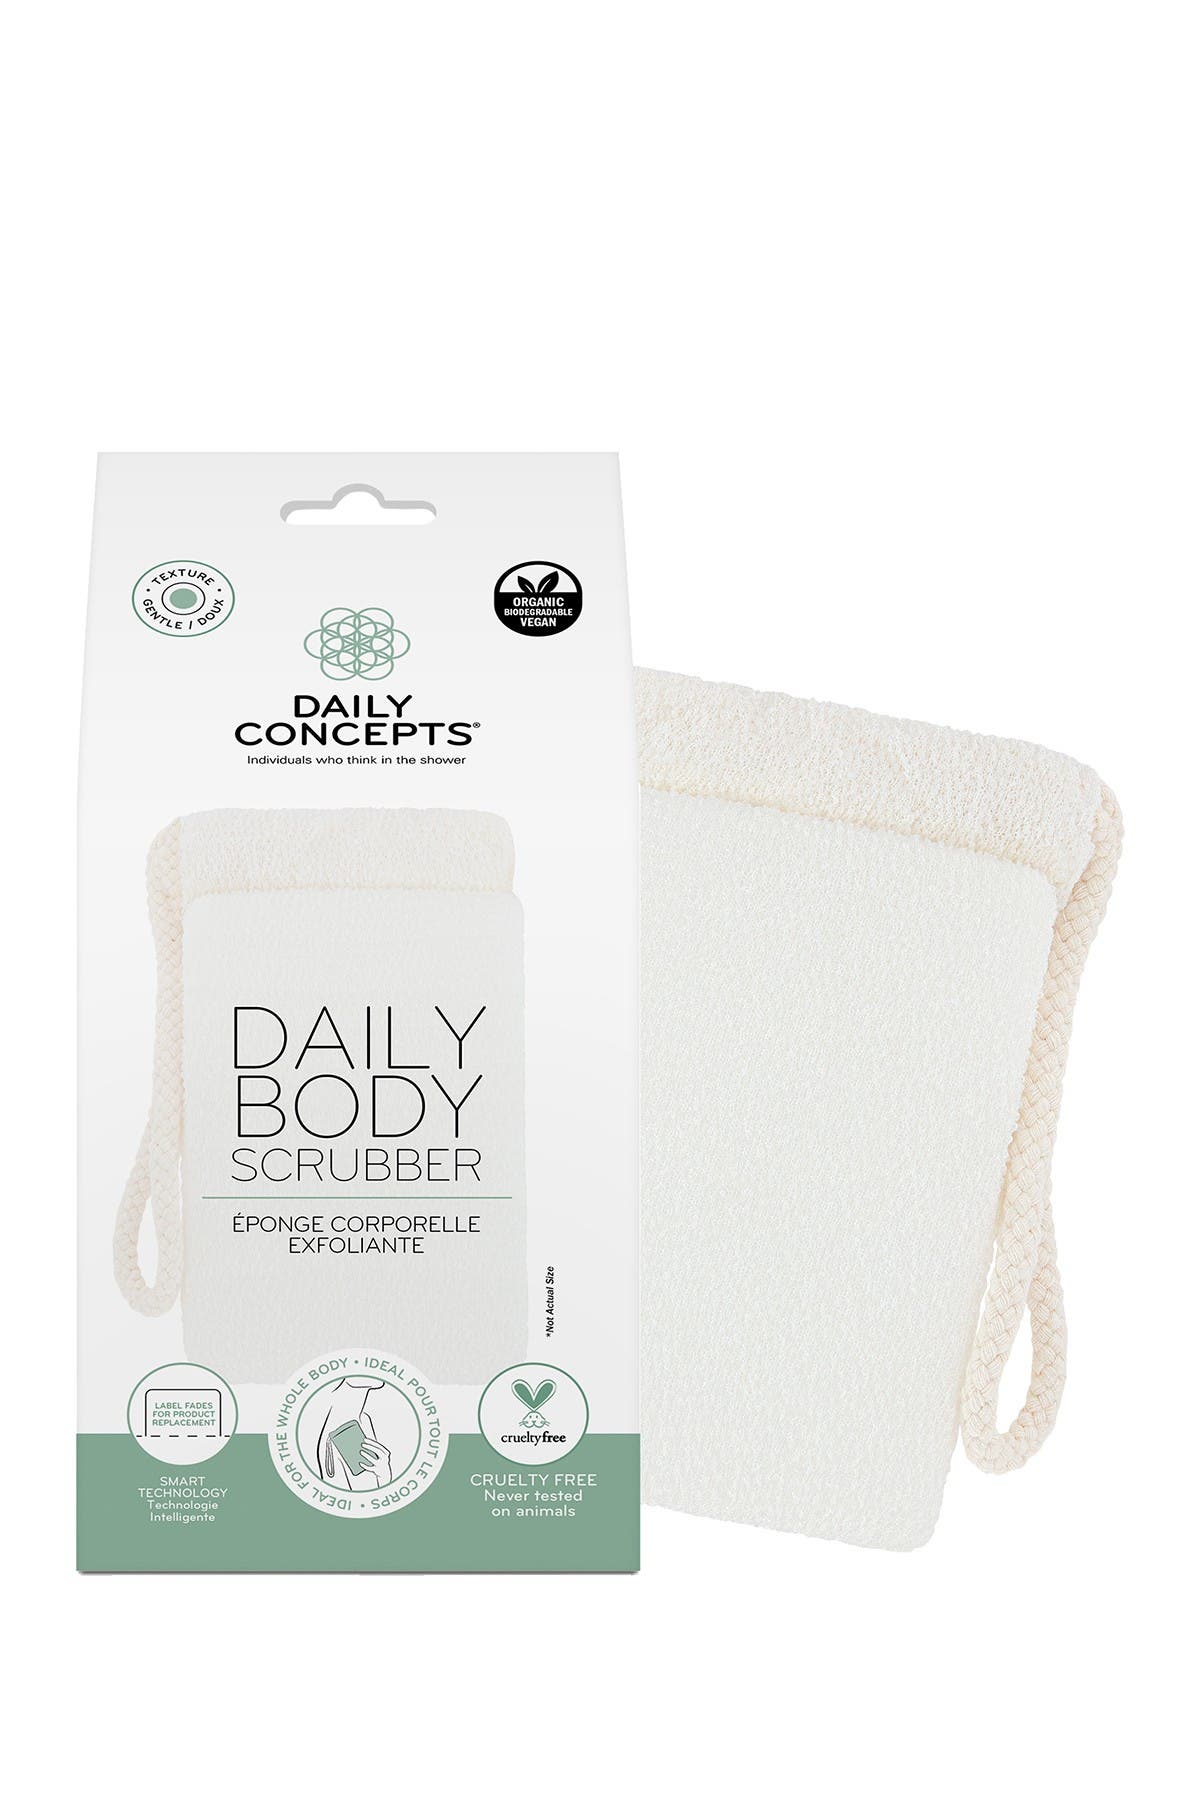 DAILY CONCEPTS DAILY BODY SCRUBBER,741021008612